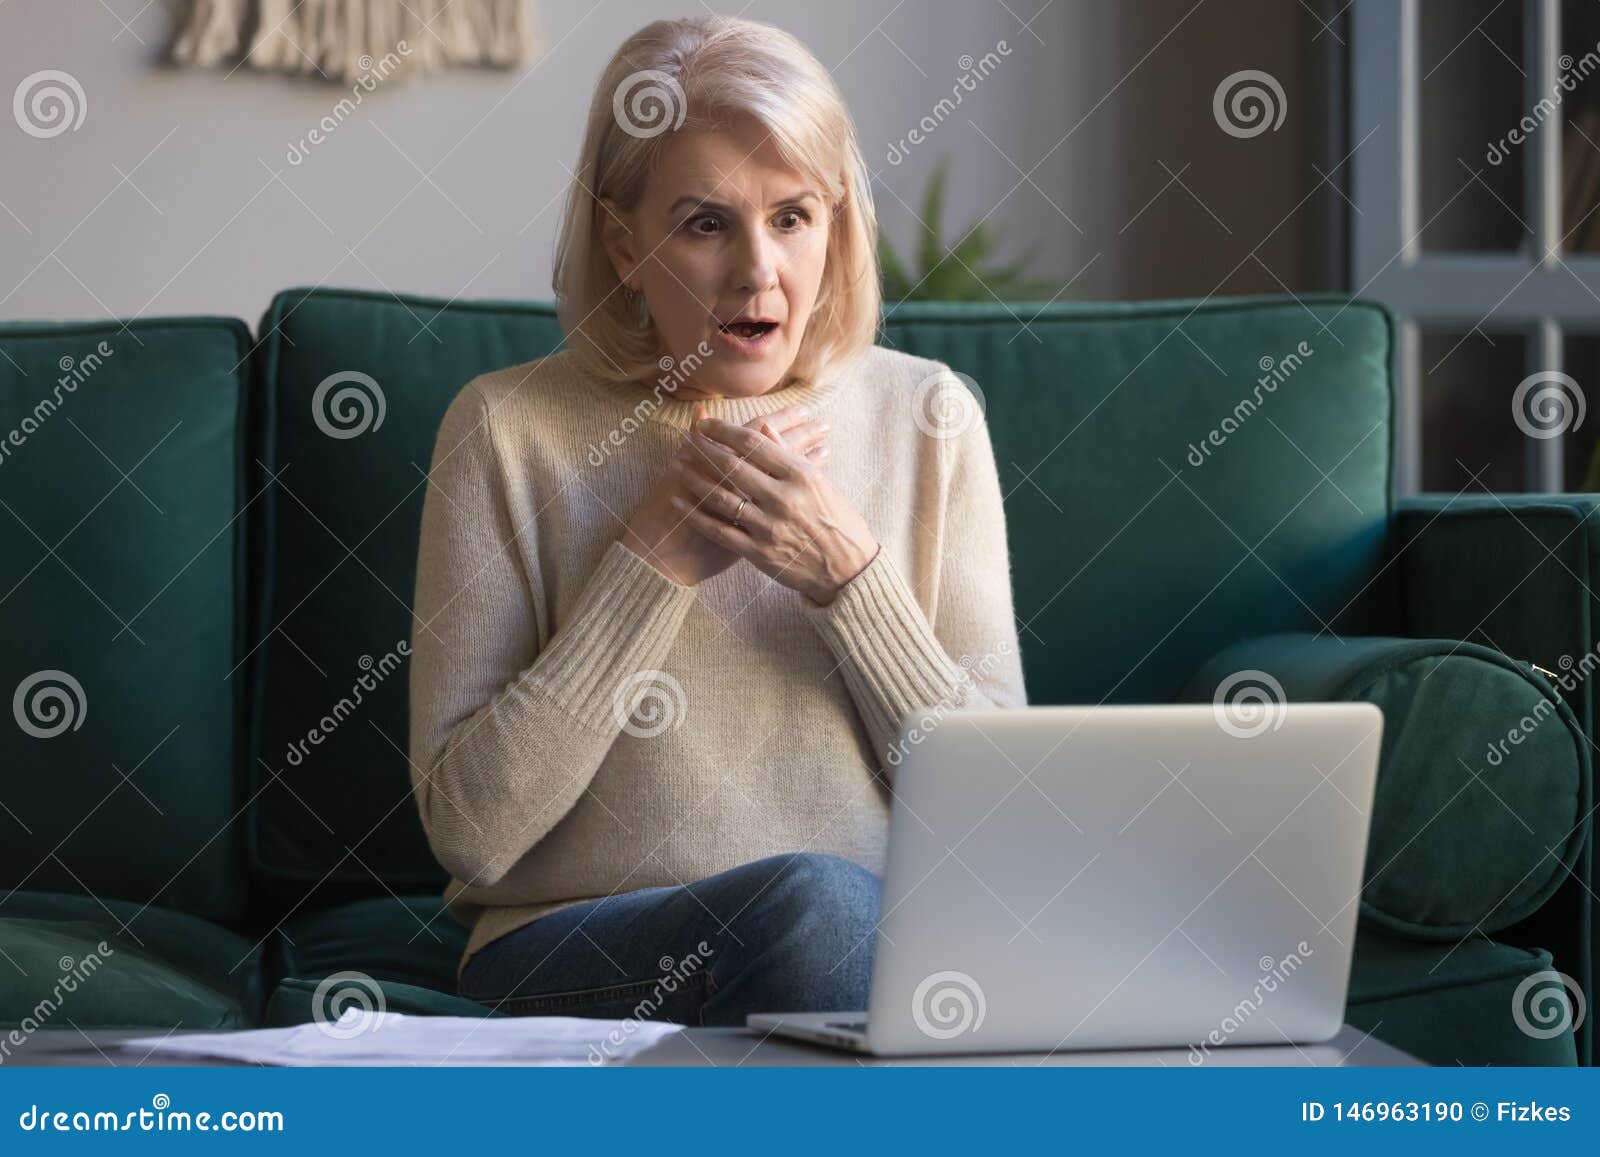 Shocked Grey Haired Mature Woman Reading Unexpected News On Laptop 